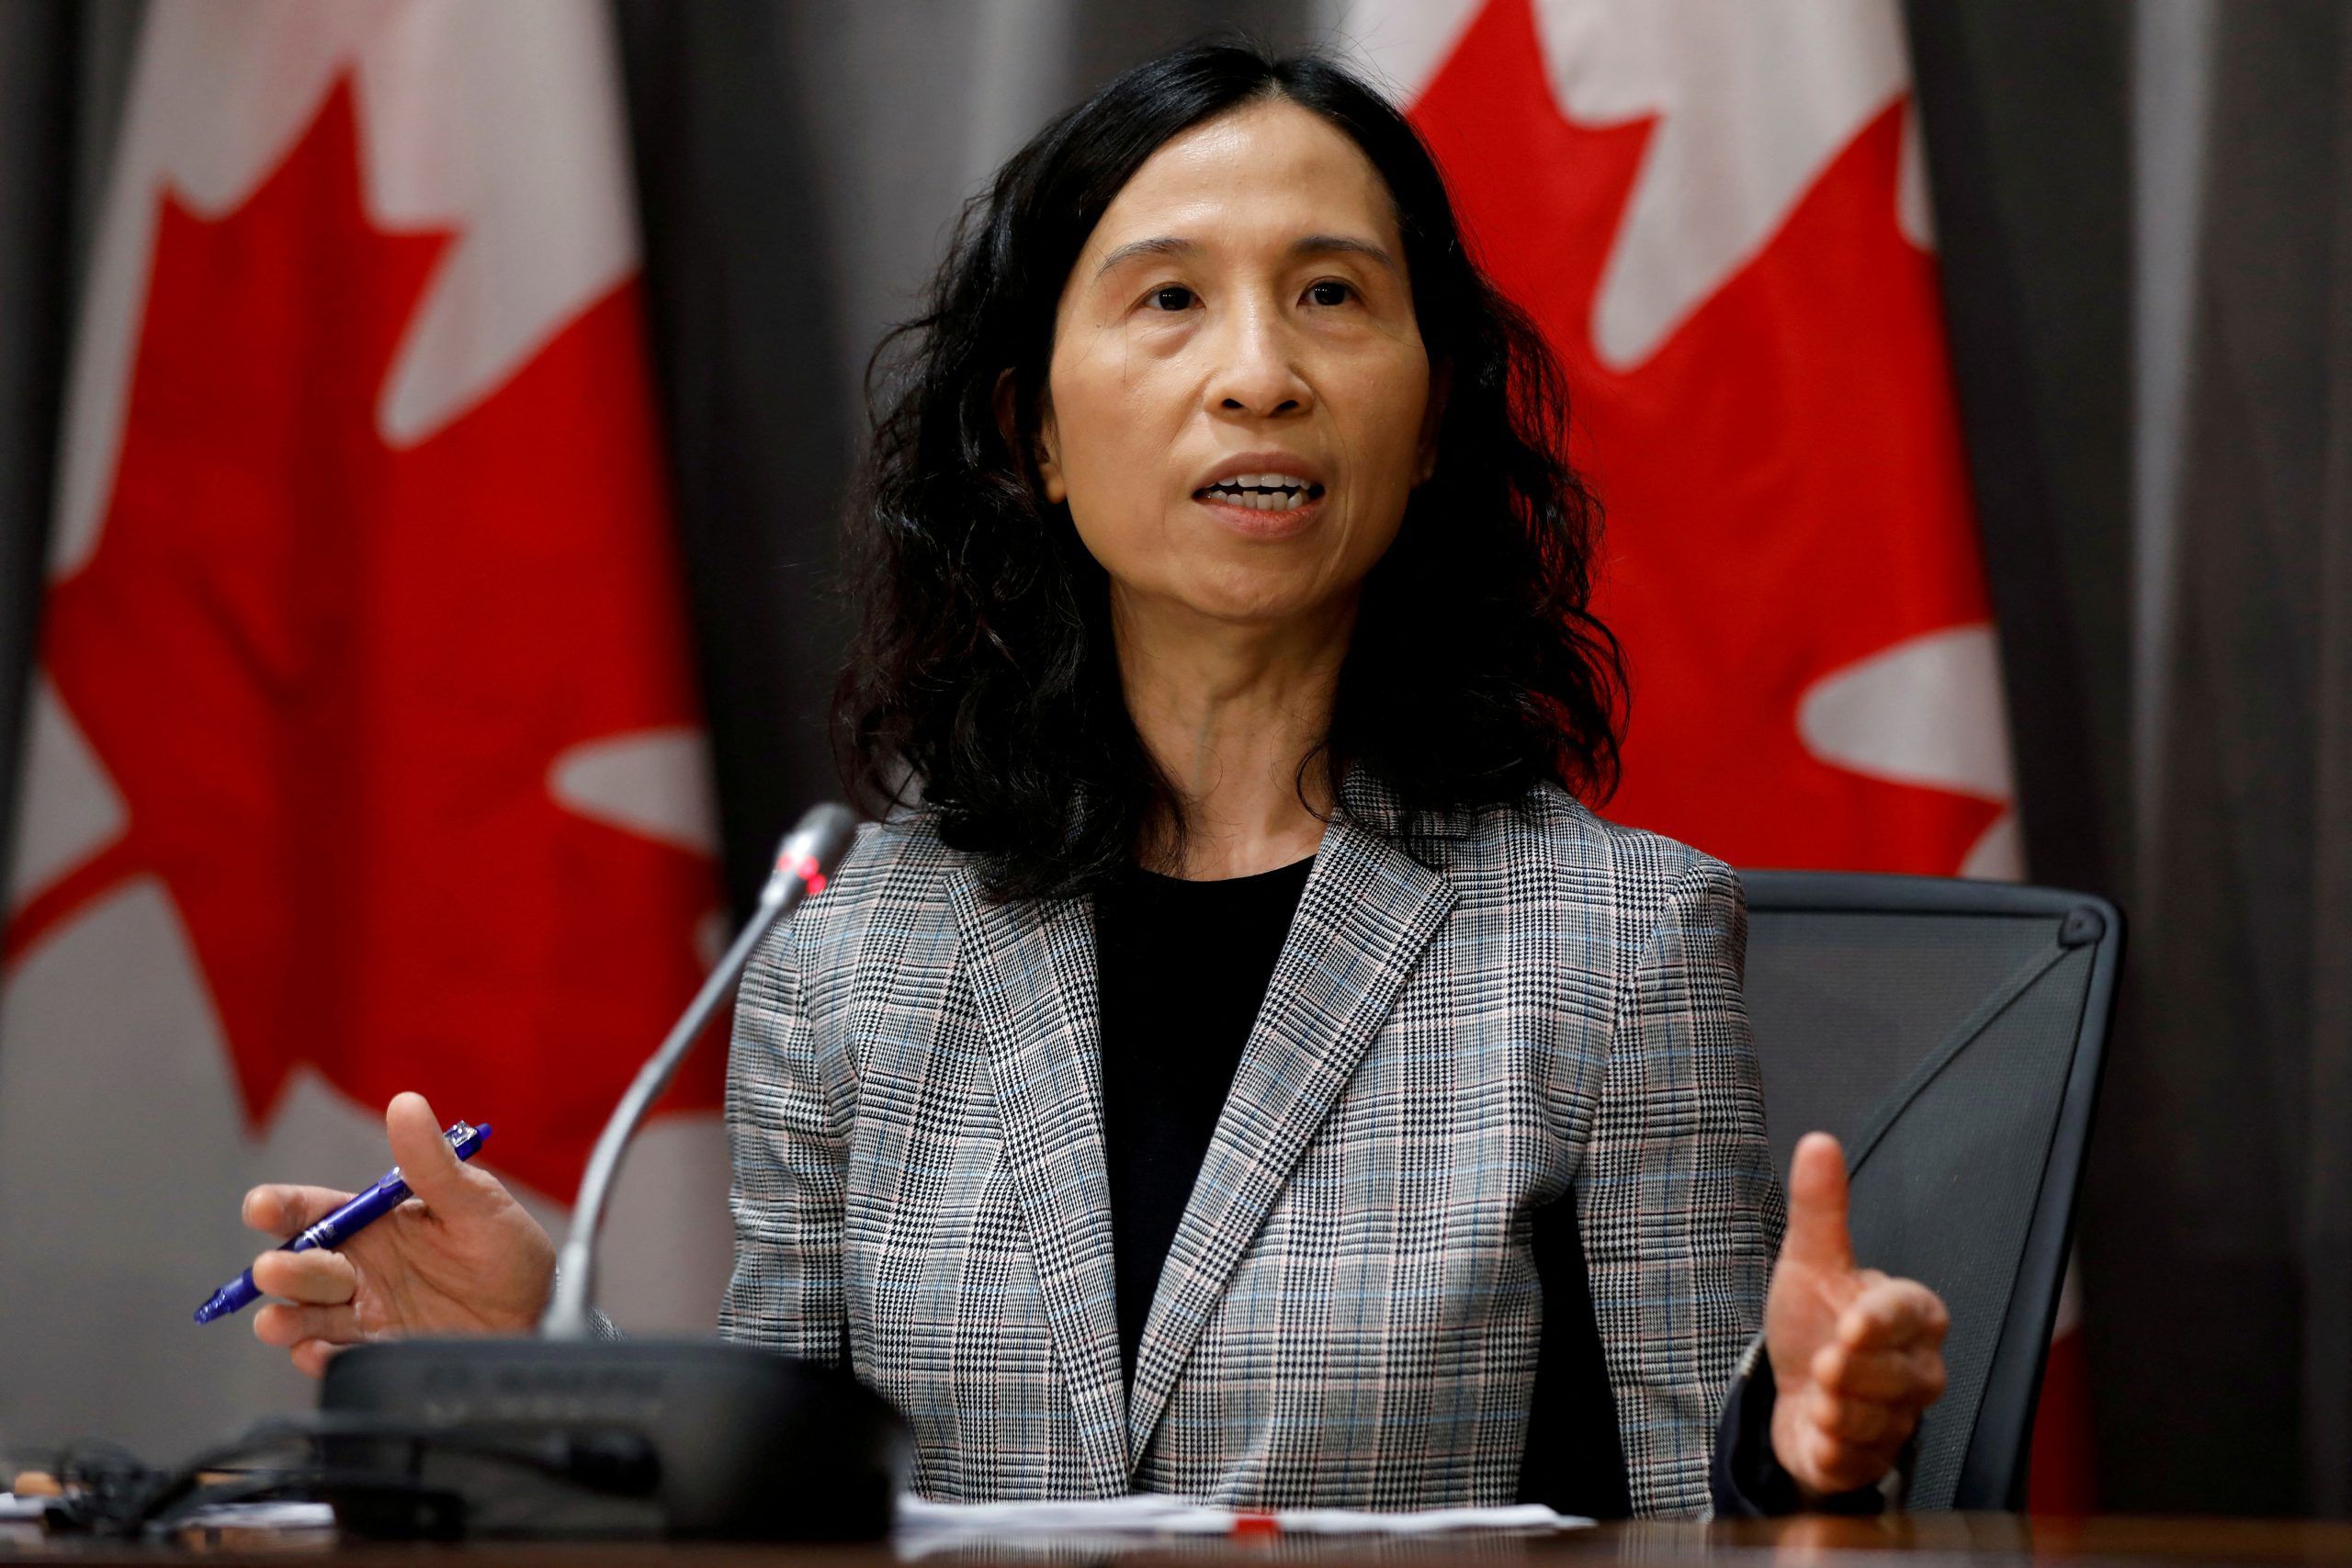 Canada's top doctor Theresa Tam reappointed for another three-year term — with a pay raise